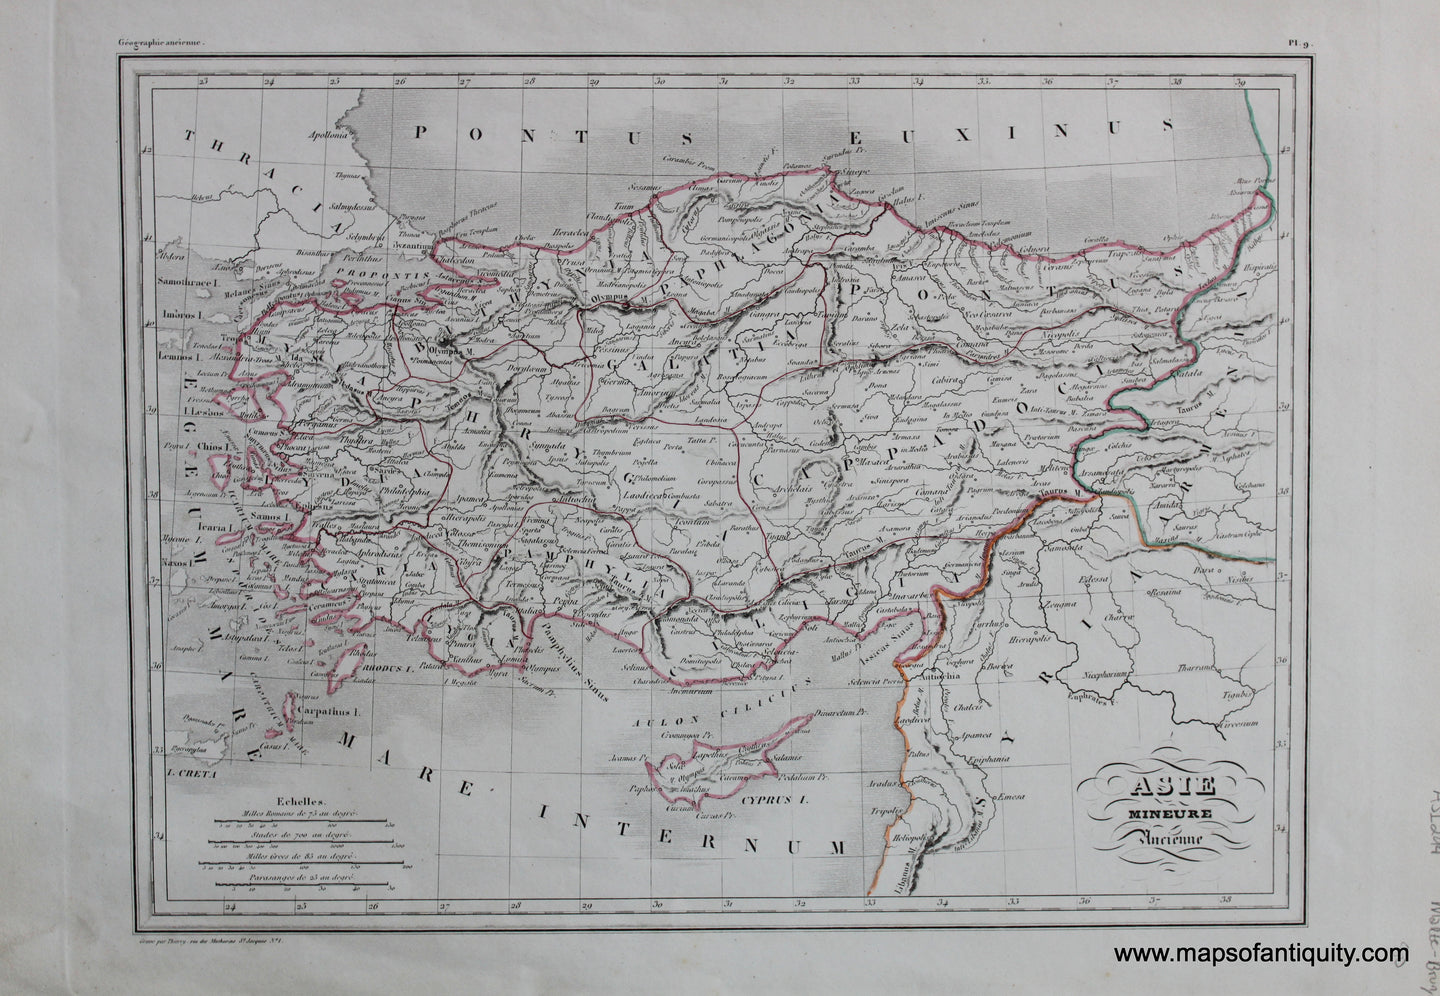 Antique-Hand-Colored-Map-Asie-Mineure-Ancienne-Asia-Asia-General-1846-M.-Malte-Brun-Maps-Of-Antiquity